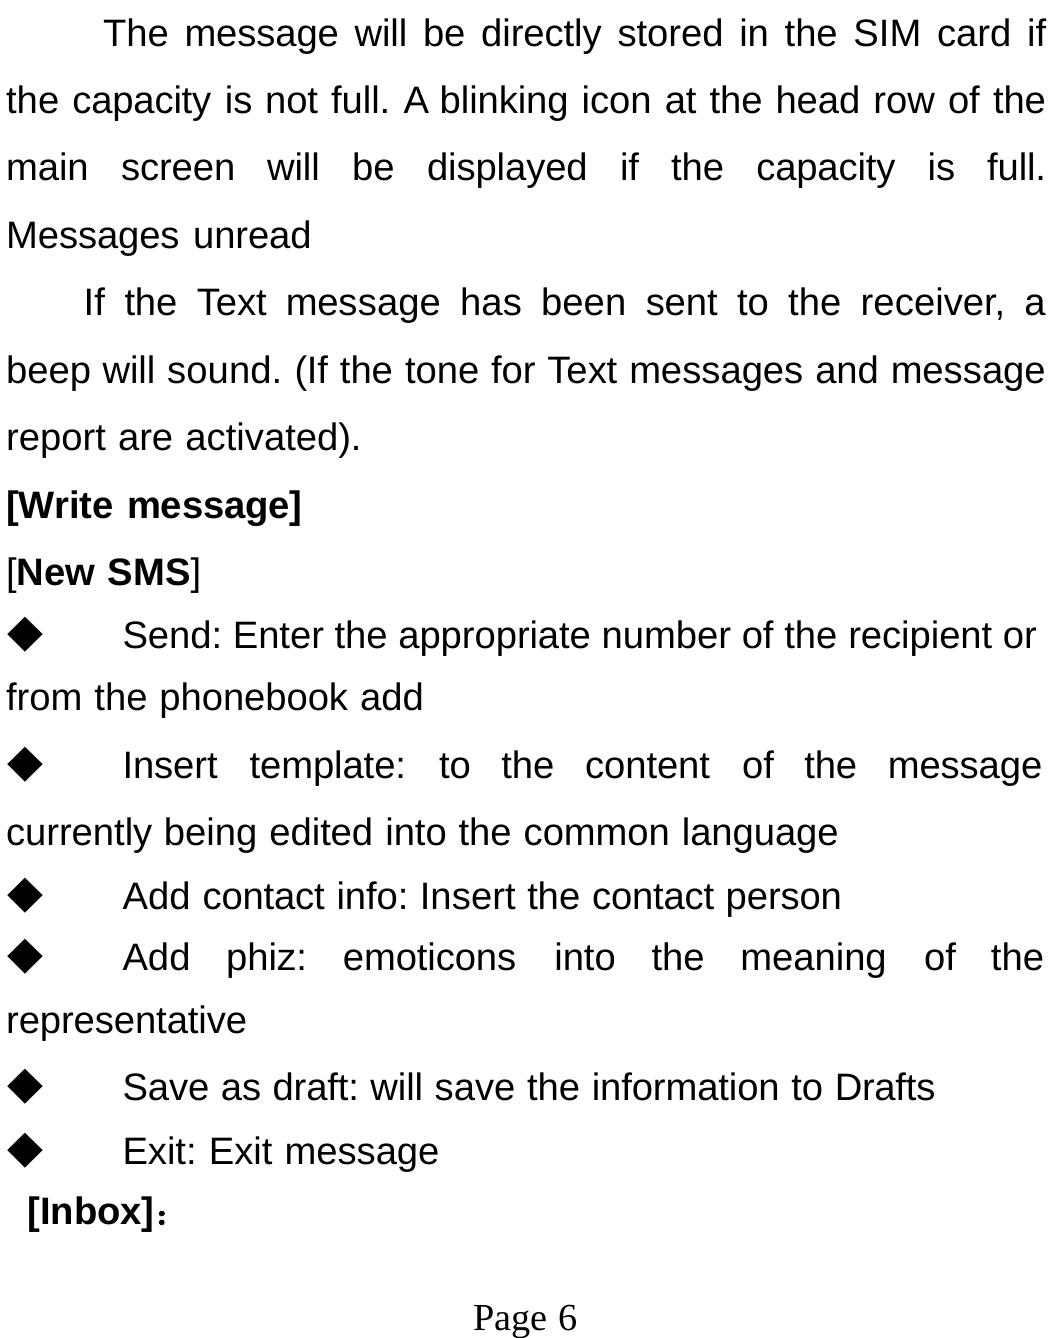 Page 6The message will be directly stored in the SIM card if the capacity is not full. A blinking icon at the head row of the main screen will be displayed if the capacity is full. Messages unread If the Text message has been sent to the receiver, a beep will sound. (If the tone for Text messages and message report are activated). [Write message] [New SMS] ◆ Send: Enter the appropriate number of the recipient or from the phonebook add ◆ Insert template: to the content of the message currently being edited into the common language ◆ Add contact info: Insert the contact person ◆ Add phiz: emoticons into the meaning of the representative ◆ Save as draft: will save the information to Drafts ◆ Exit: Exit message [Inbox]： 